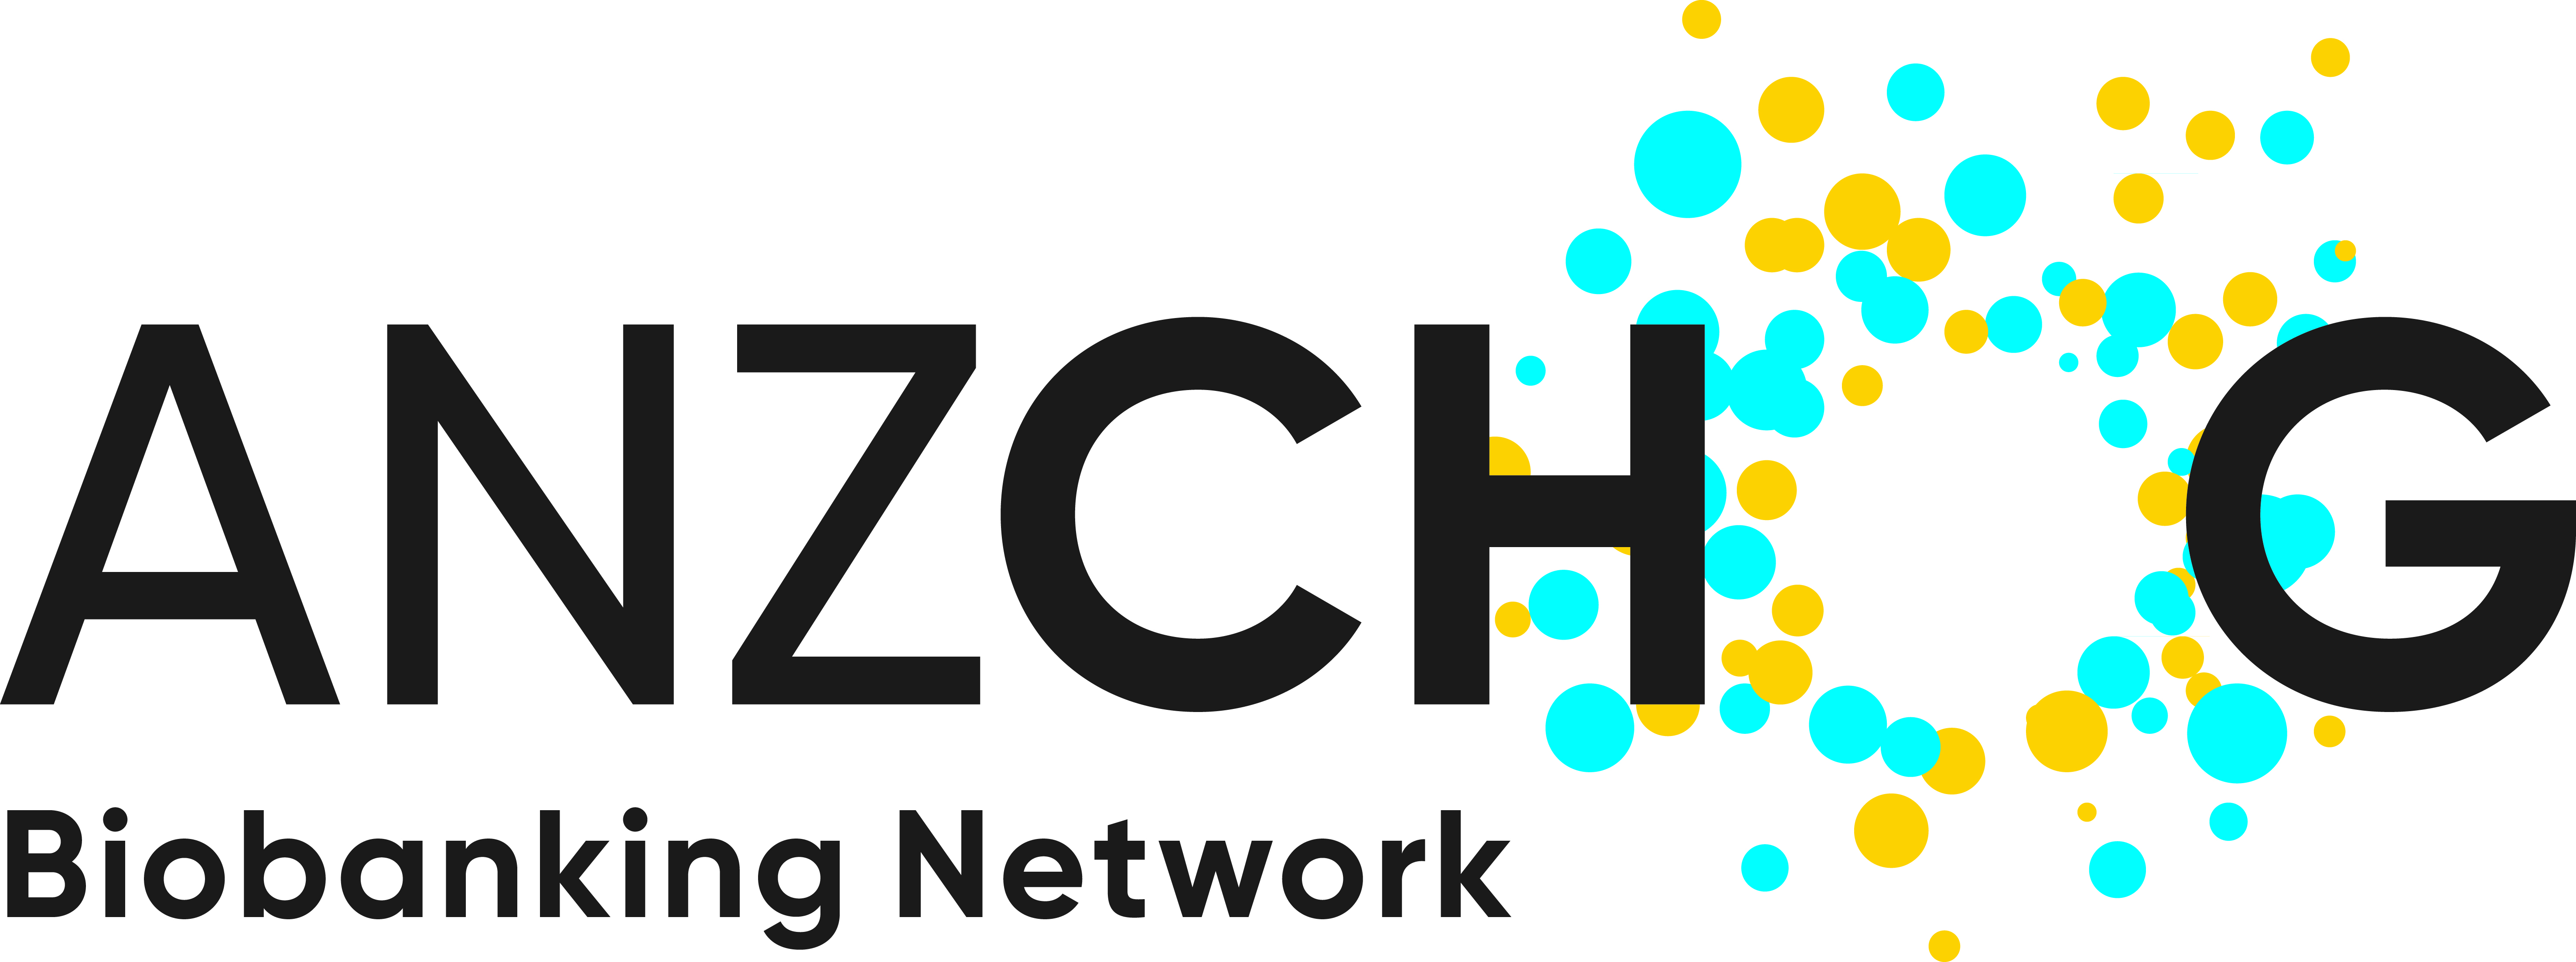 ANCHOG biobanking network logo with the acronym ANZCHOG with blue and yellow dots forming the O in the acronym above the words biobanking network